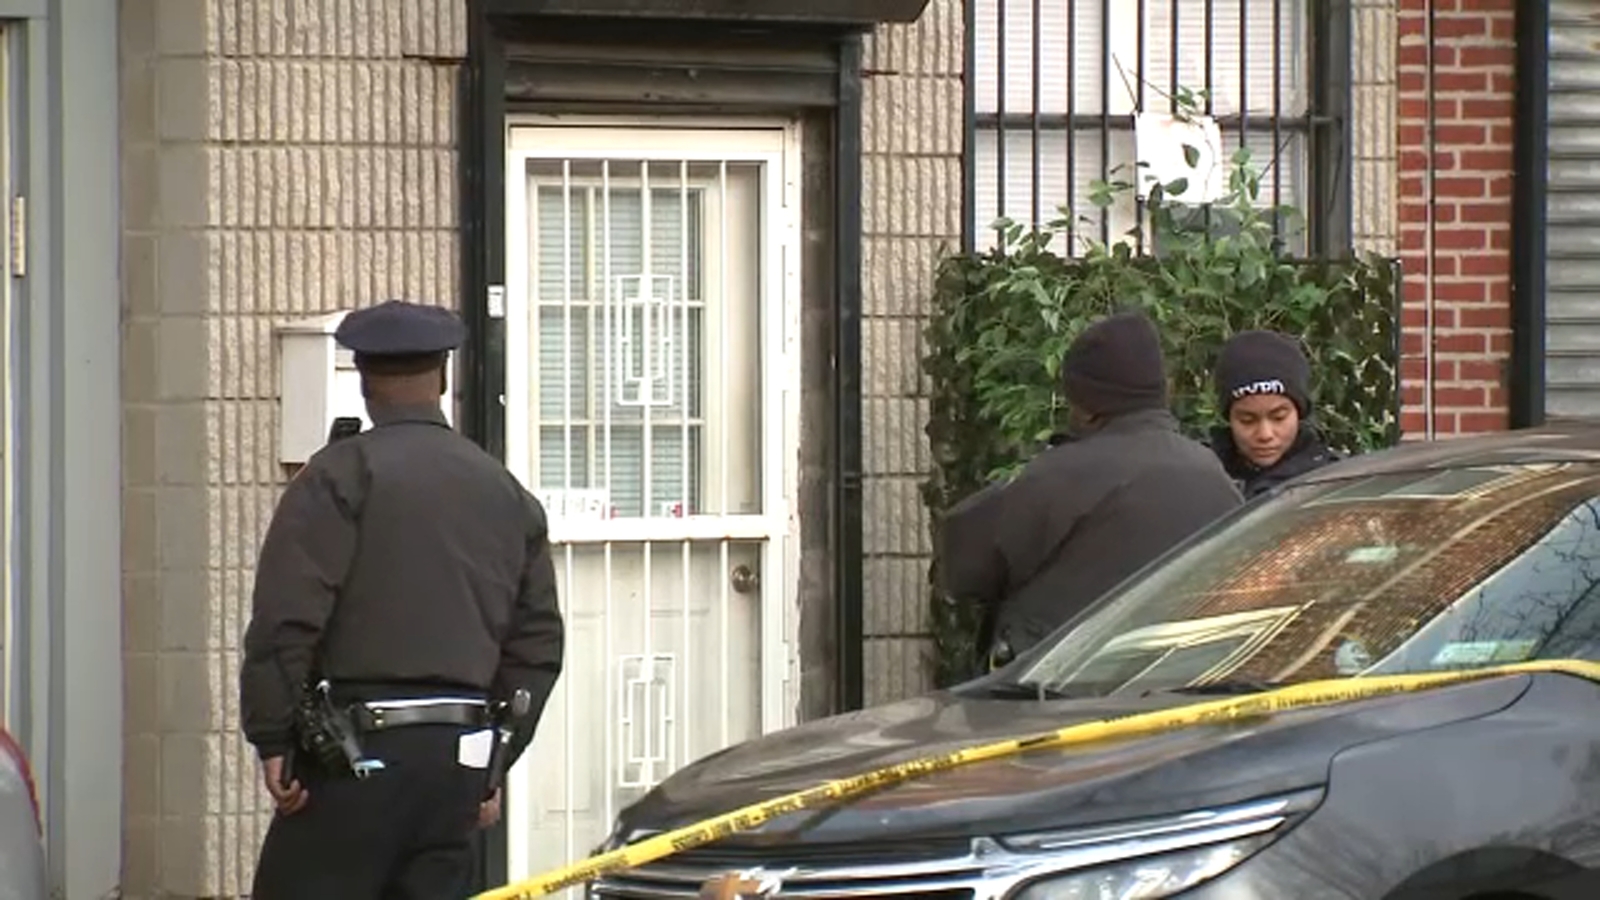 Stabbing in Bensonhurst home invasion kills 61-year-old, 2 19-year-olds wounded